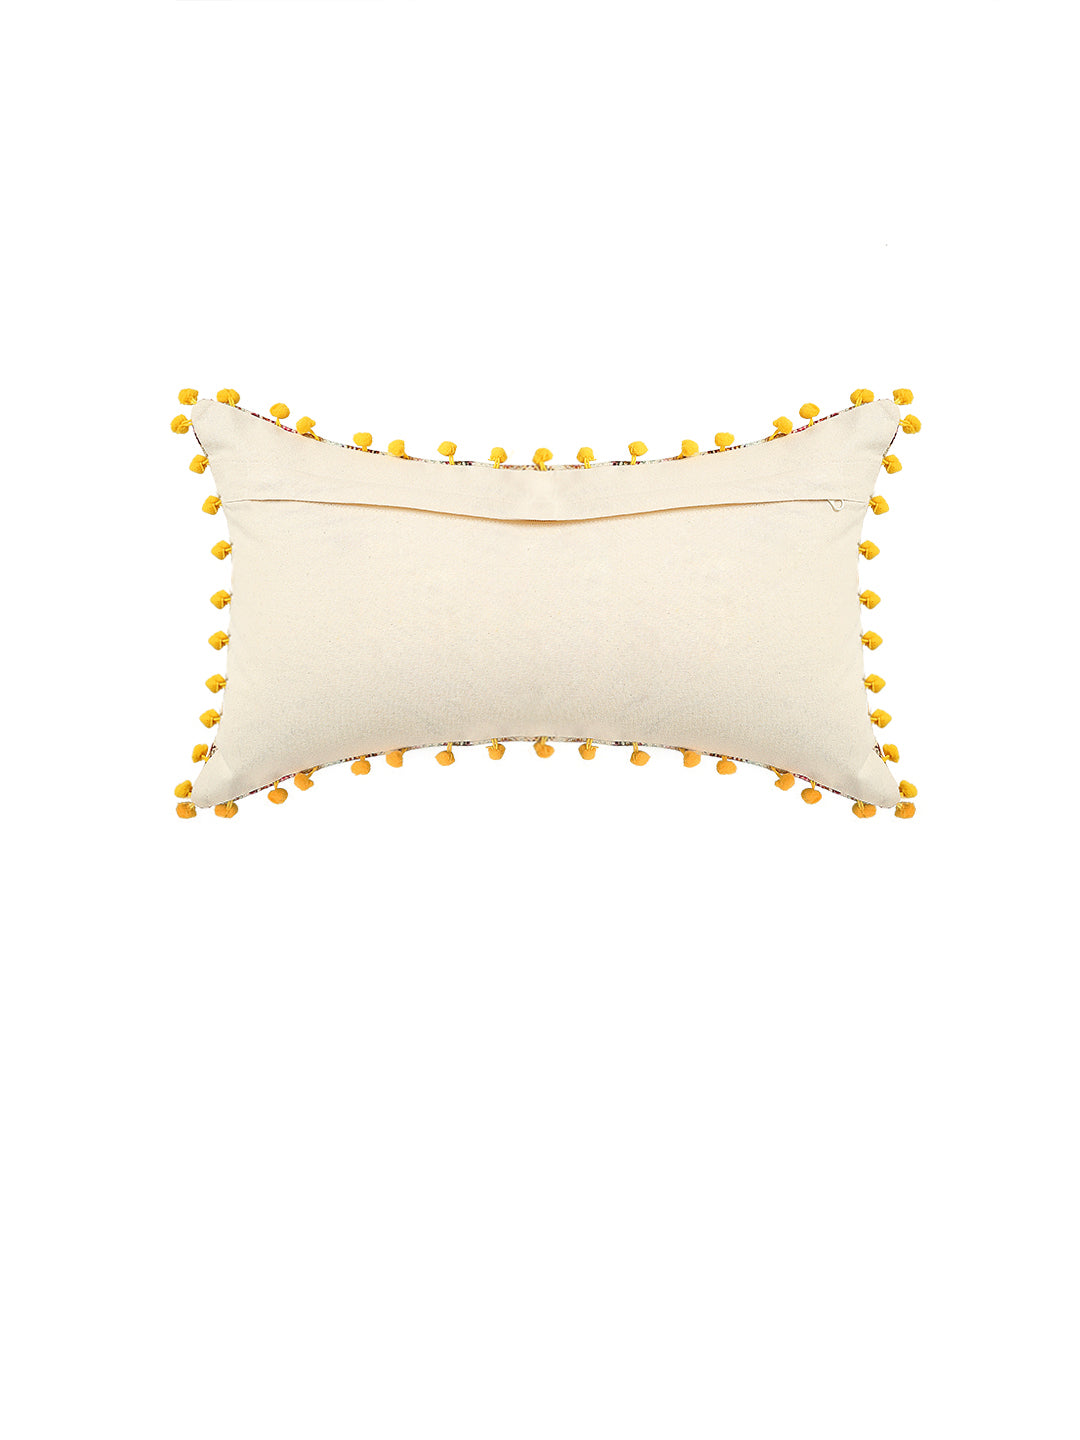 Ejder Cushion Cover with Filler 30x50cm